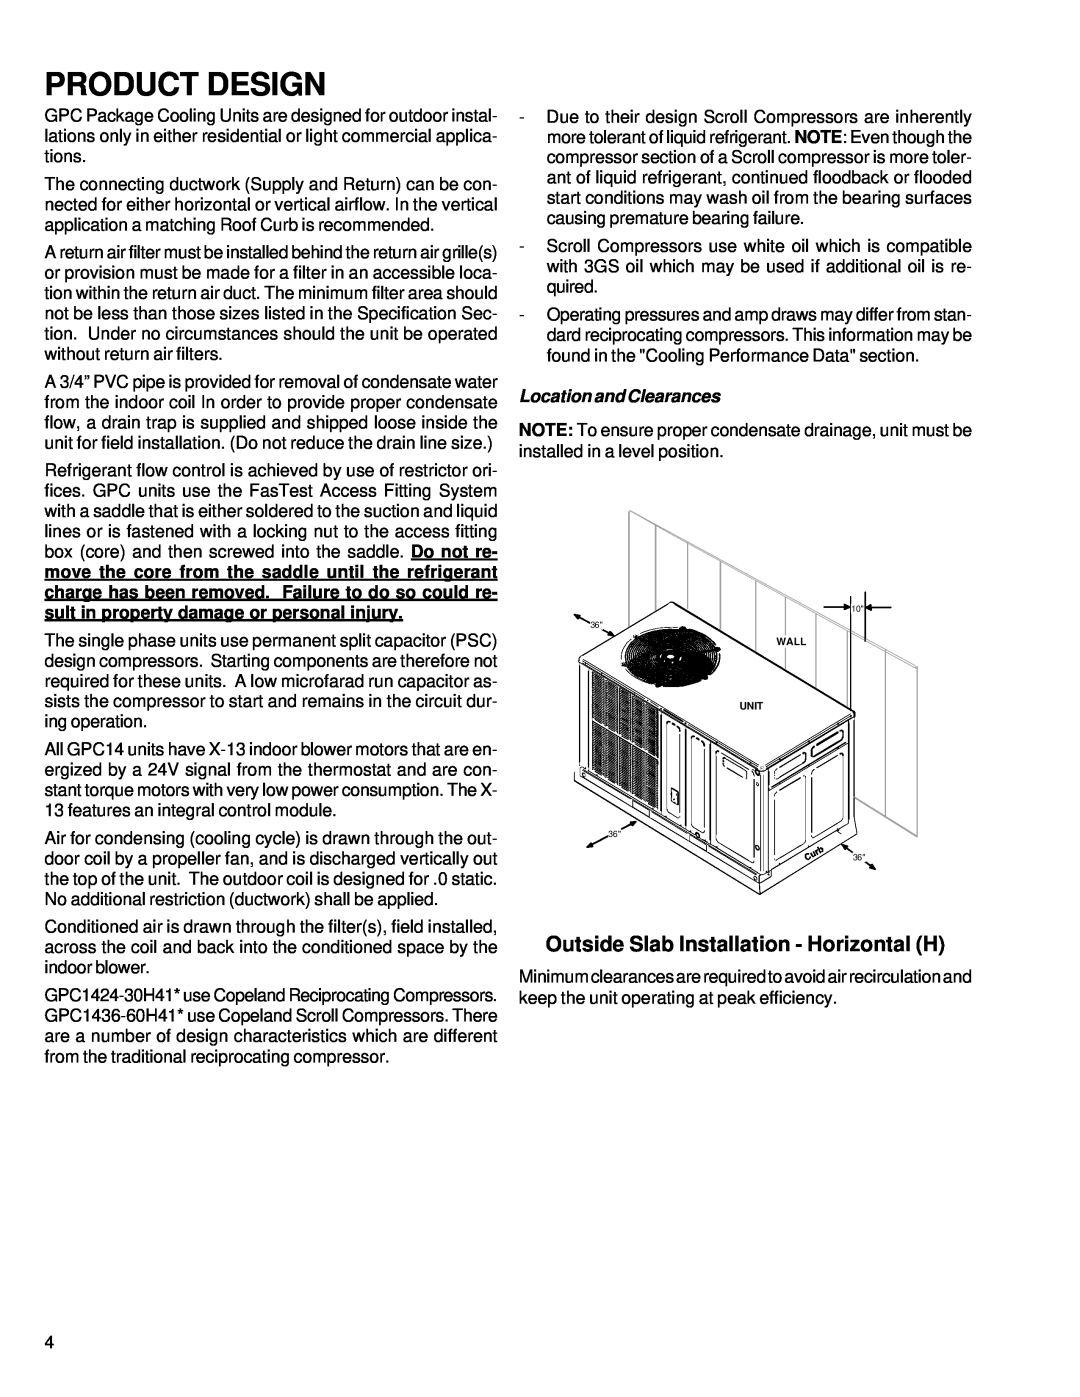 Goodman Mfg RS6300011 service manual Product Design, Outside Slab Installation - Horizontal H, Location and Clearances 